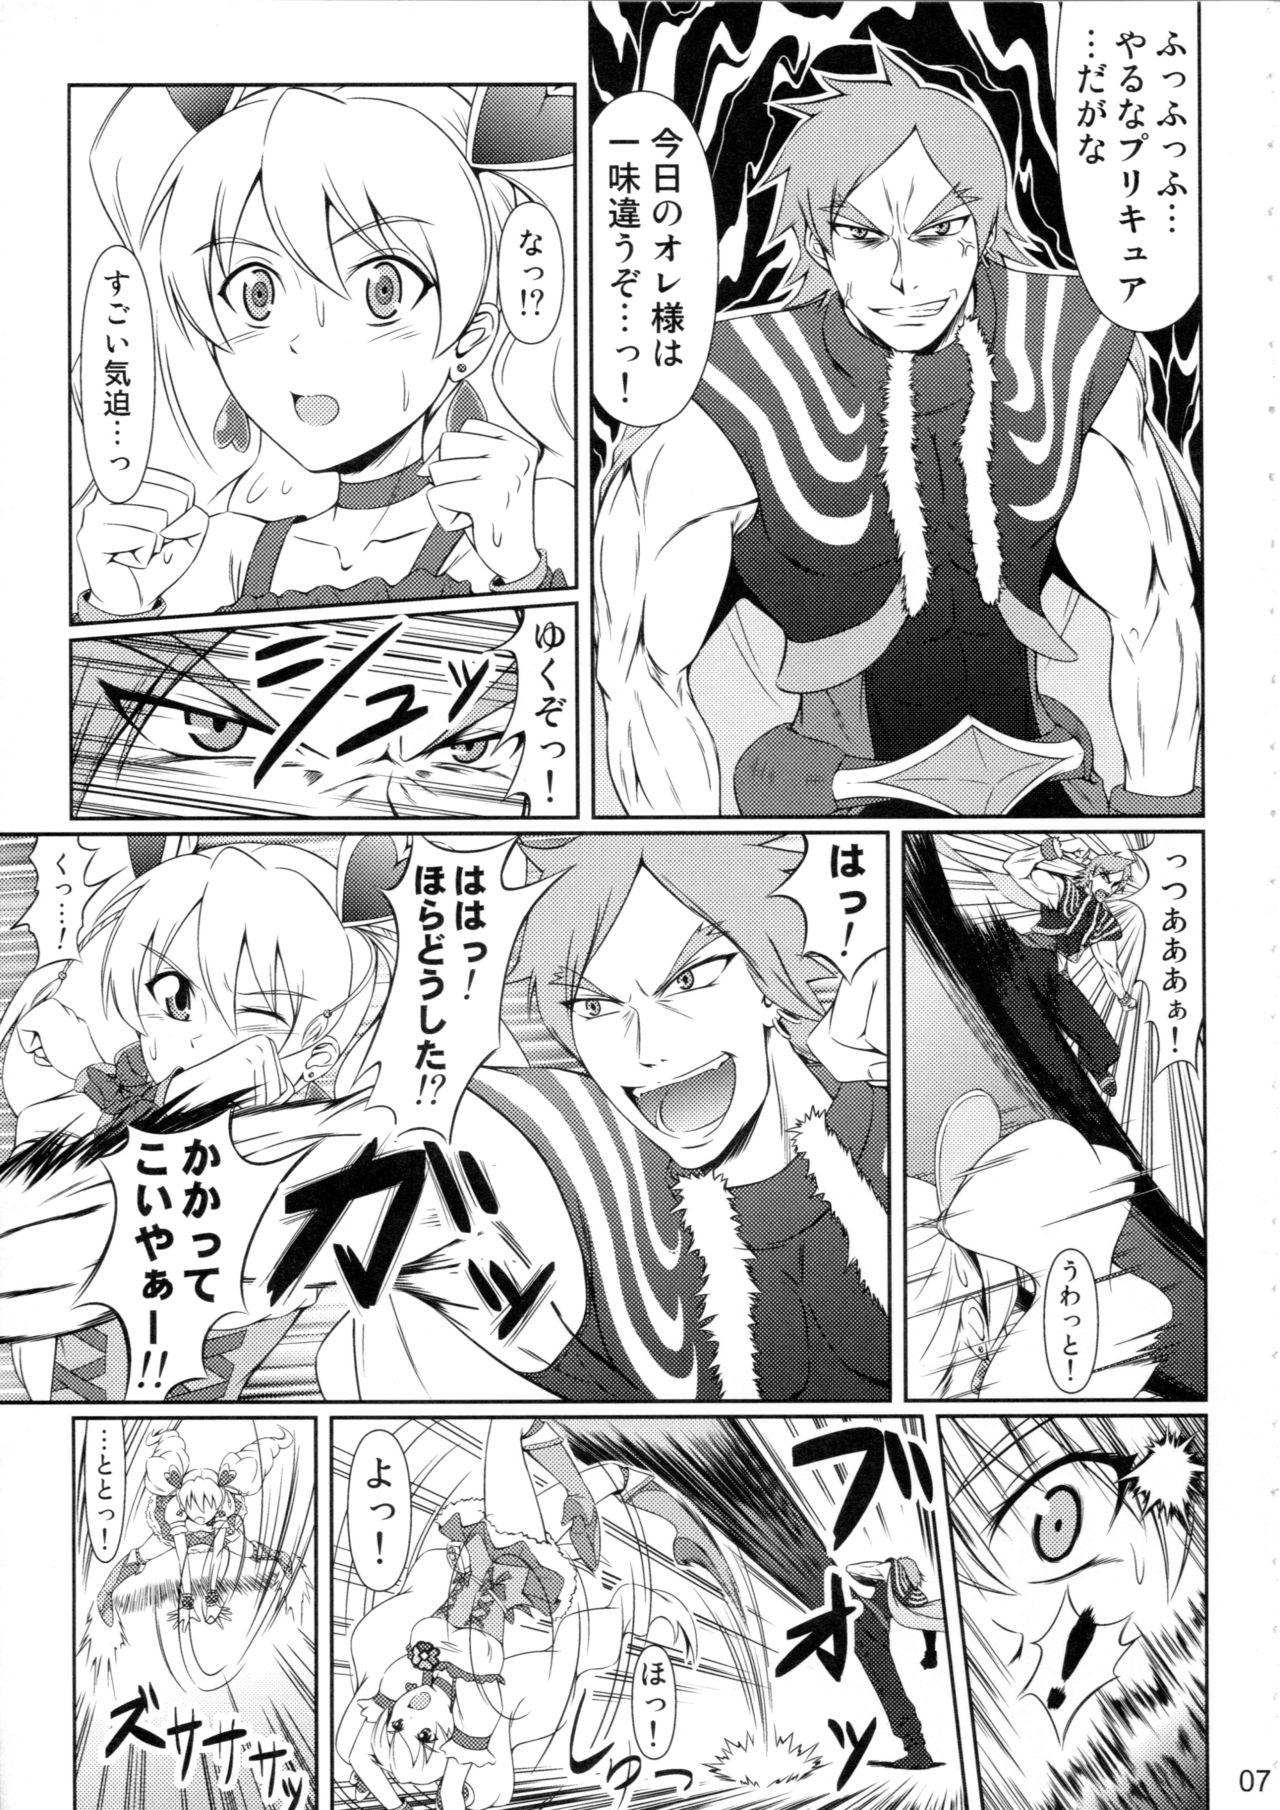 Audition Heroine-mode 2 - Fresh precure Hot Teen - Page 6